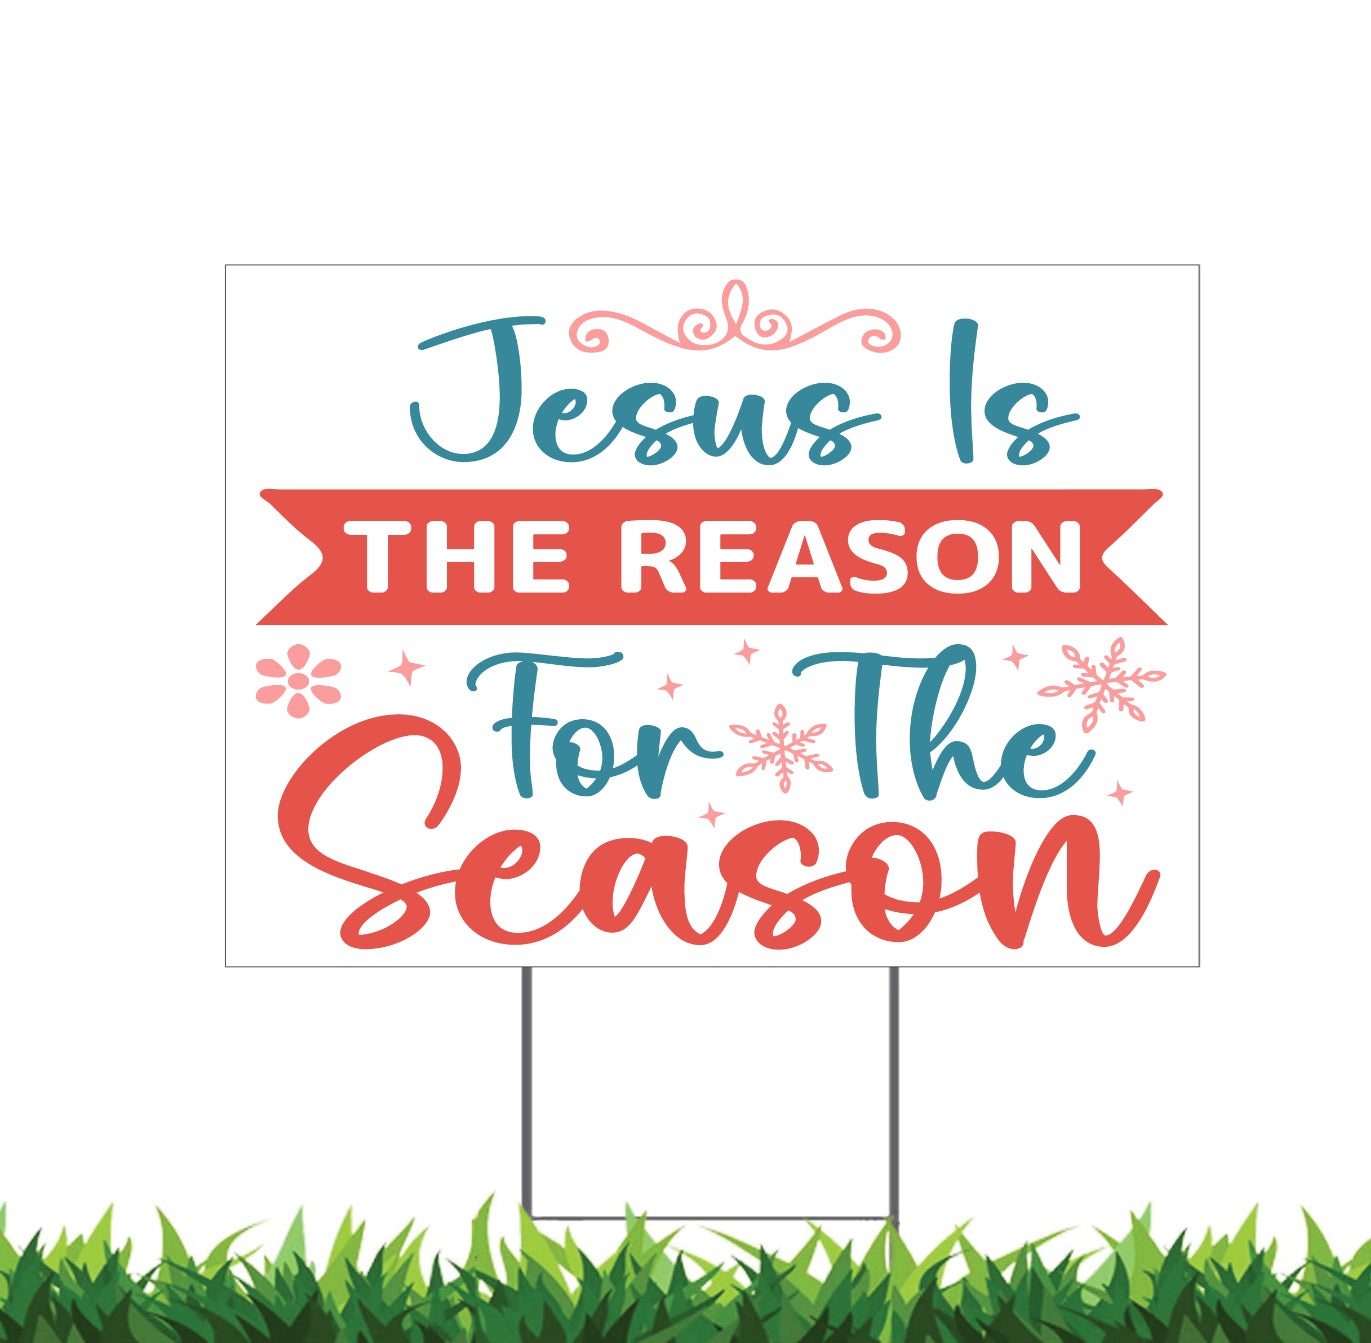 Jesus Is The Reason For The Season Yard Sign, 18x12, 24x18, or 36x24 inch, Double Sided, H-Stake Included, v6